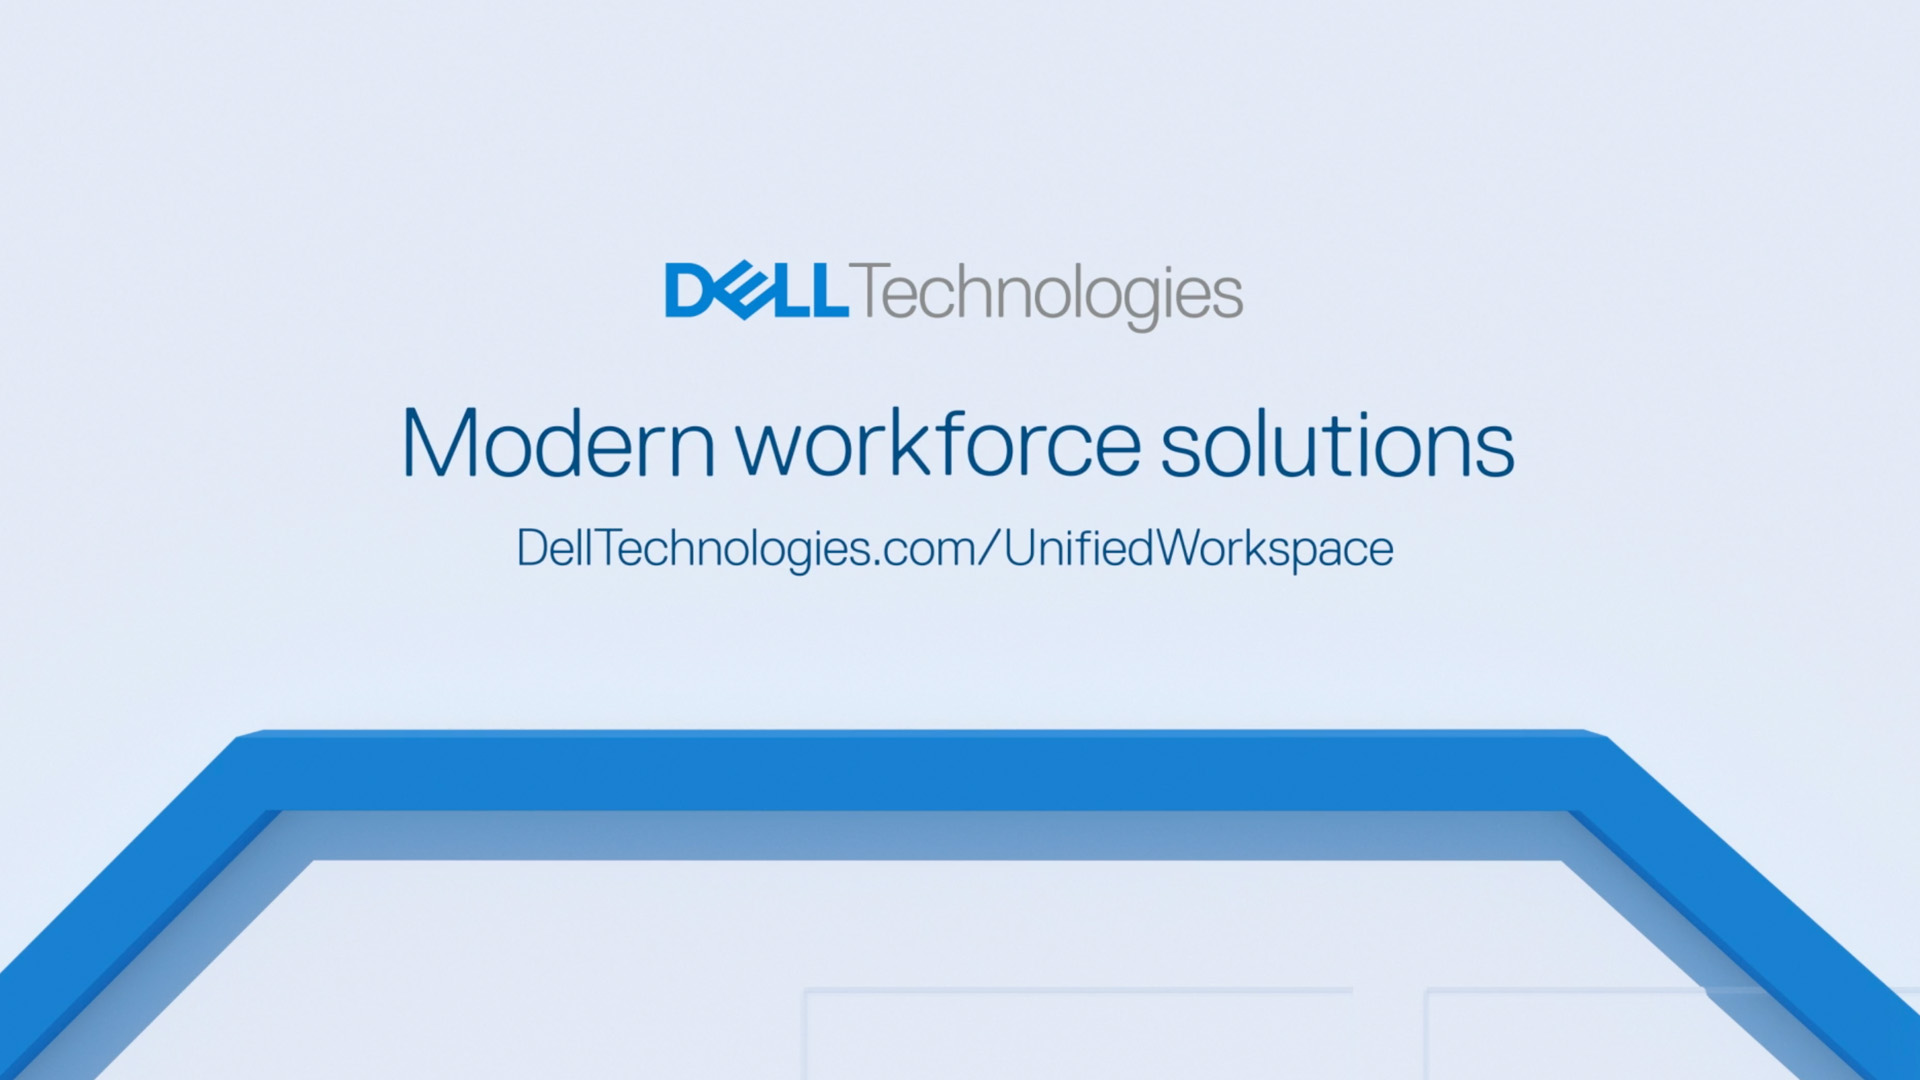 Image from the video series with the onscreen text: Dell Technologies Modern workforce solutions and the url.